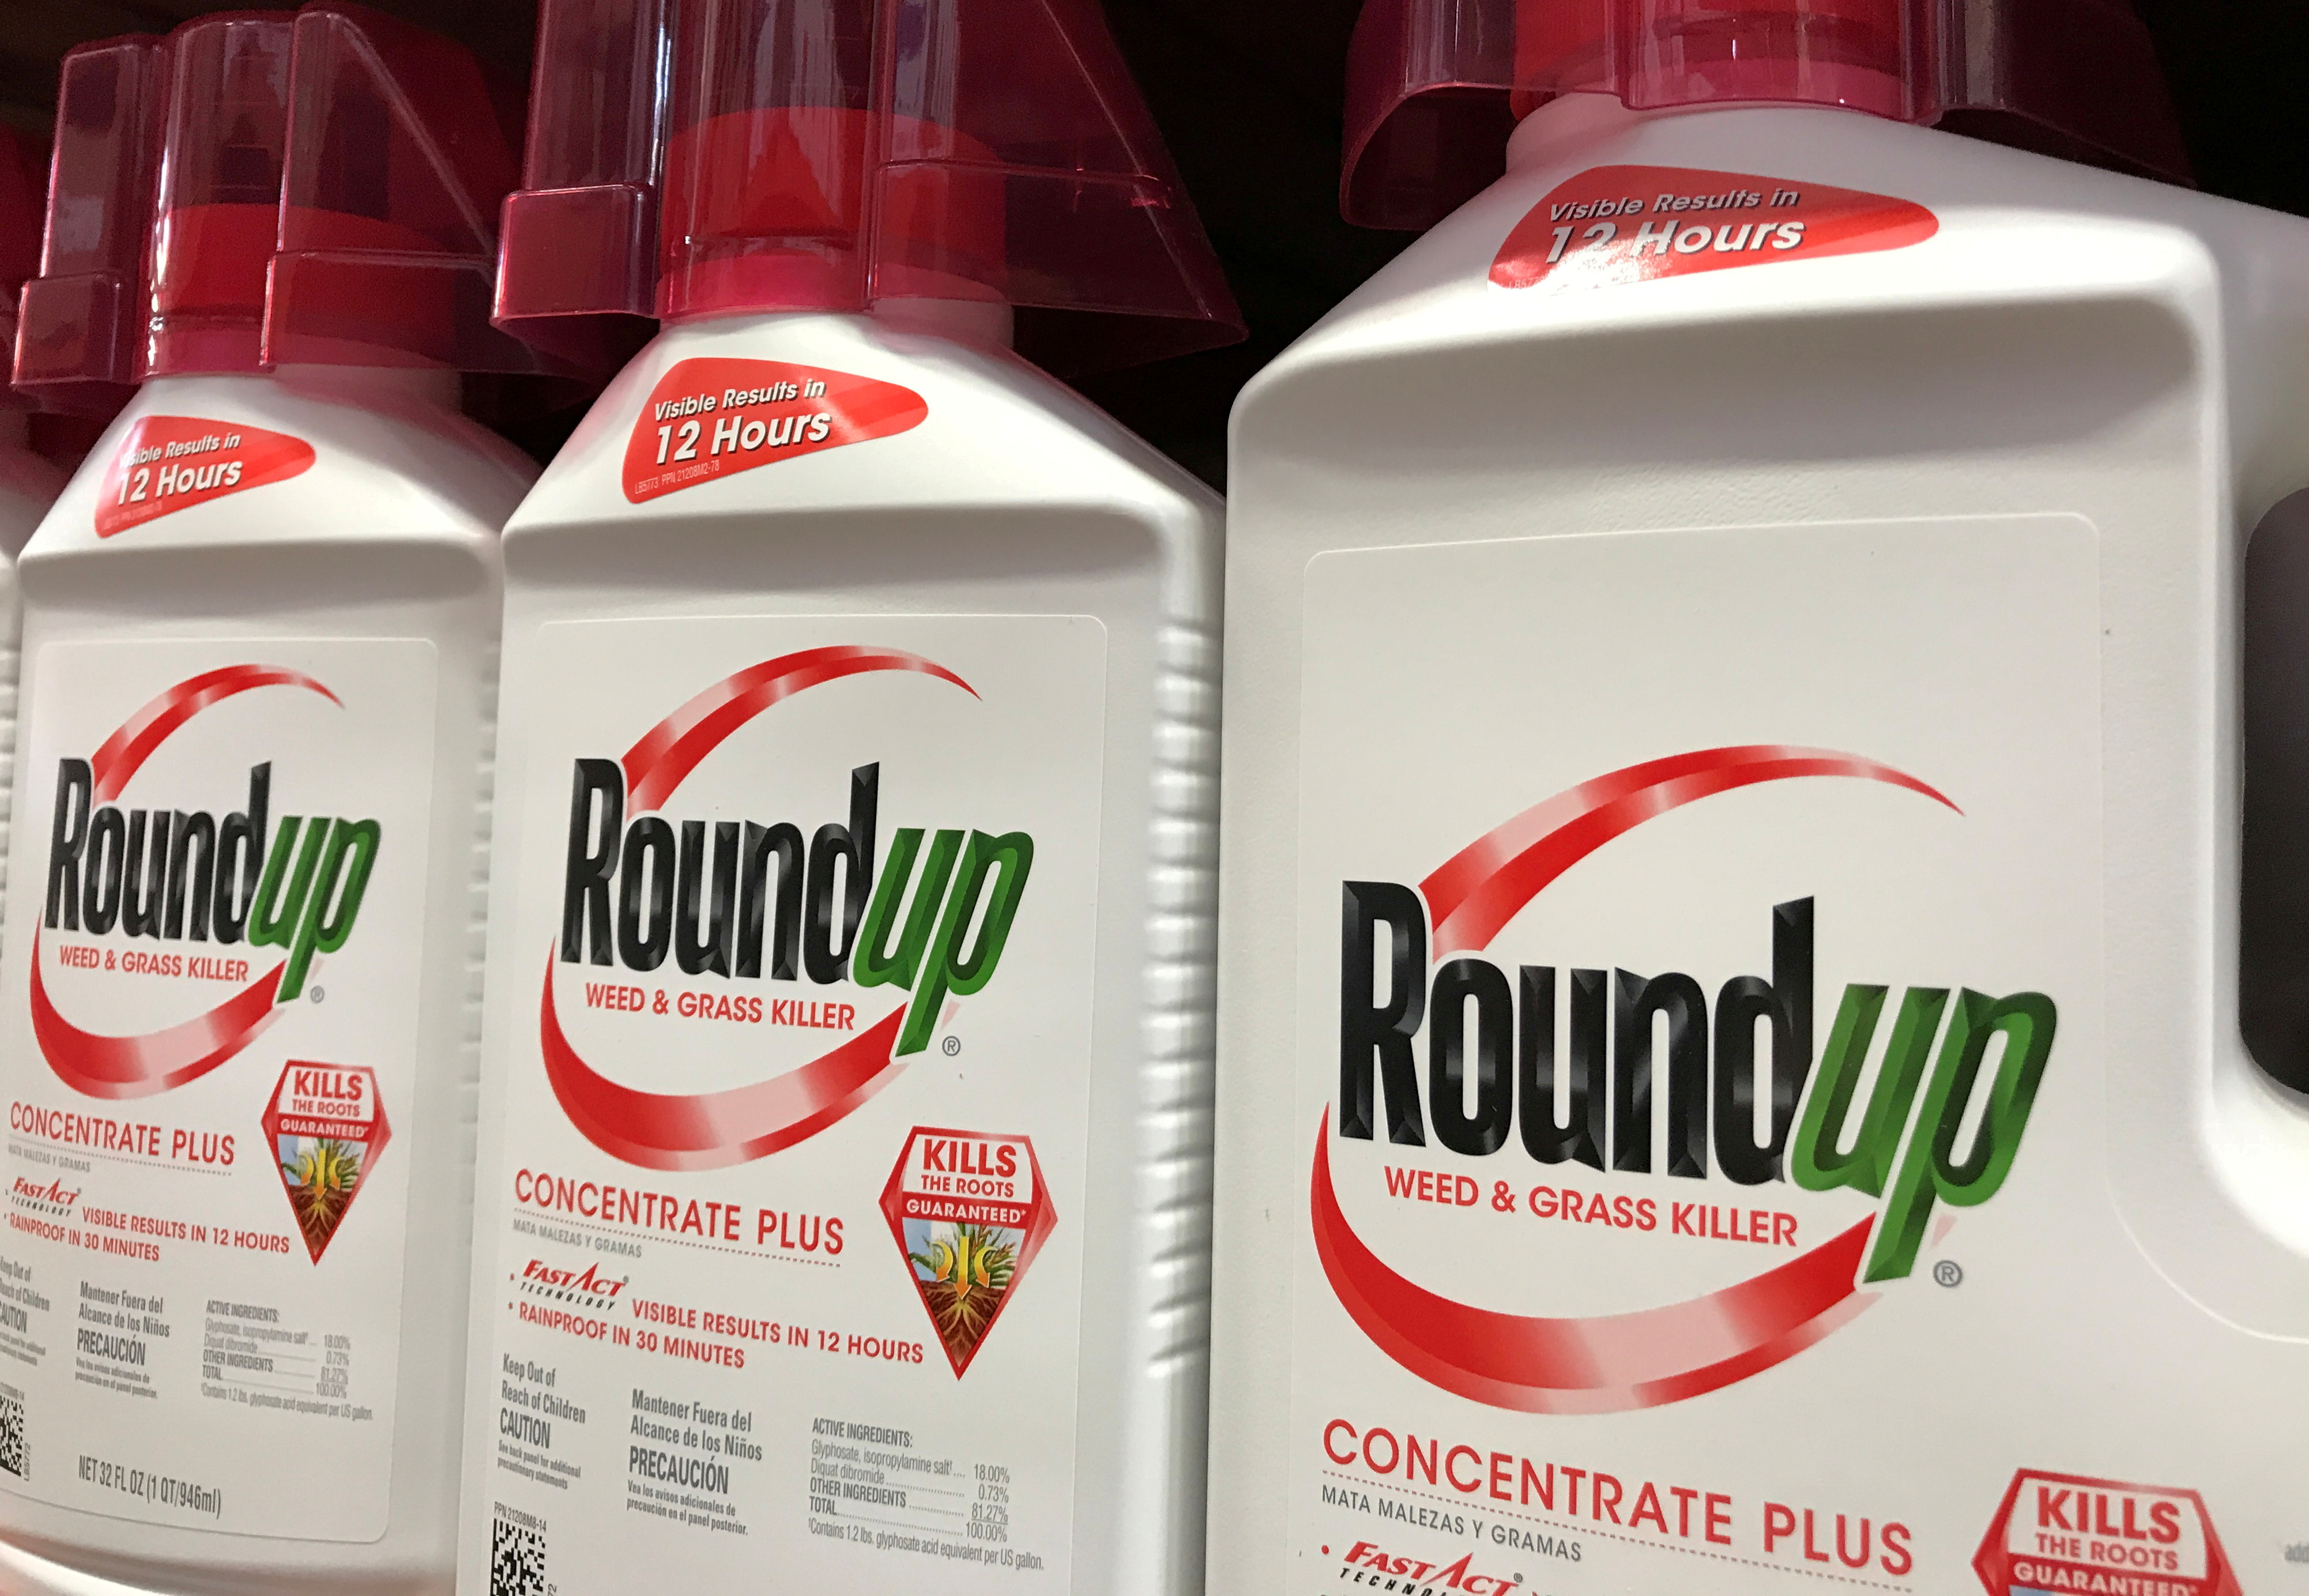 Bayer unit Monsanto Co's Roundup shown for sale in California